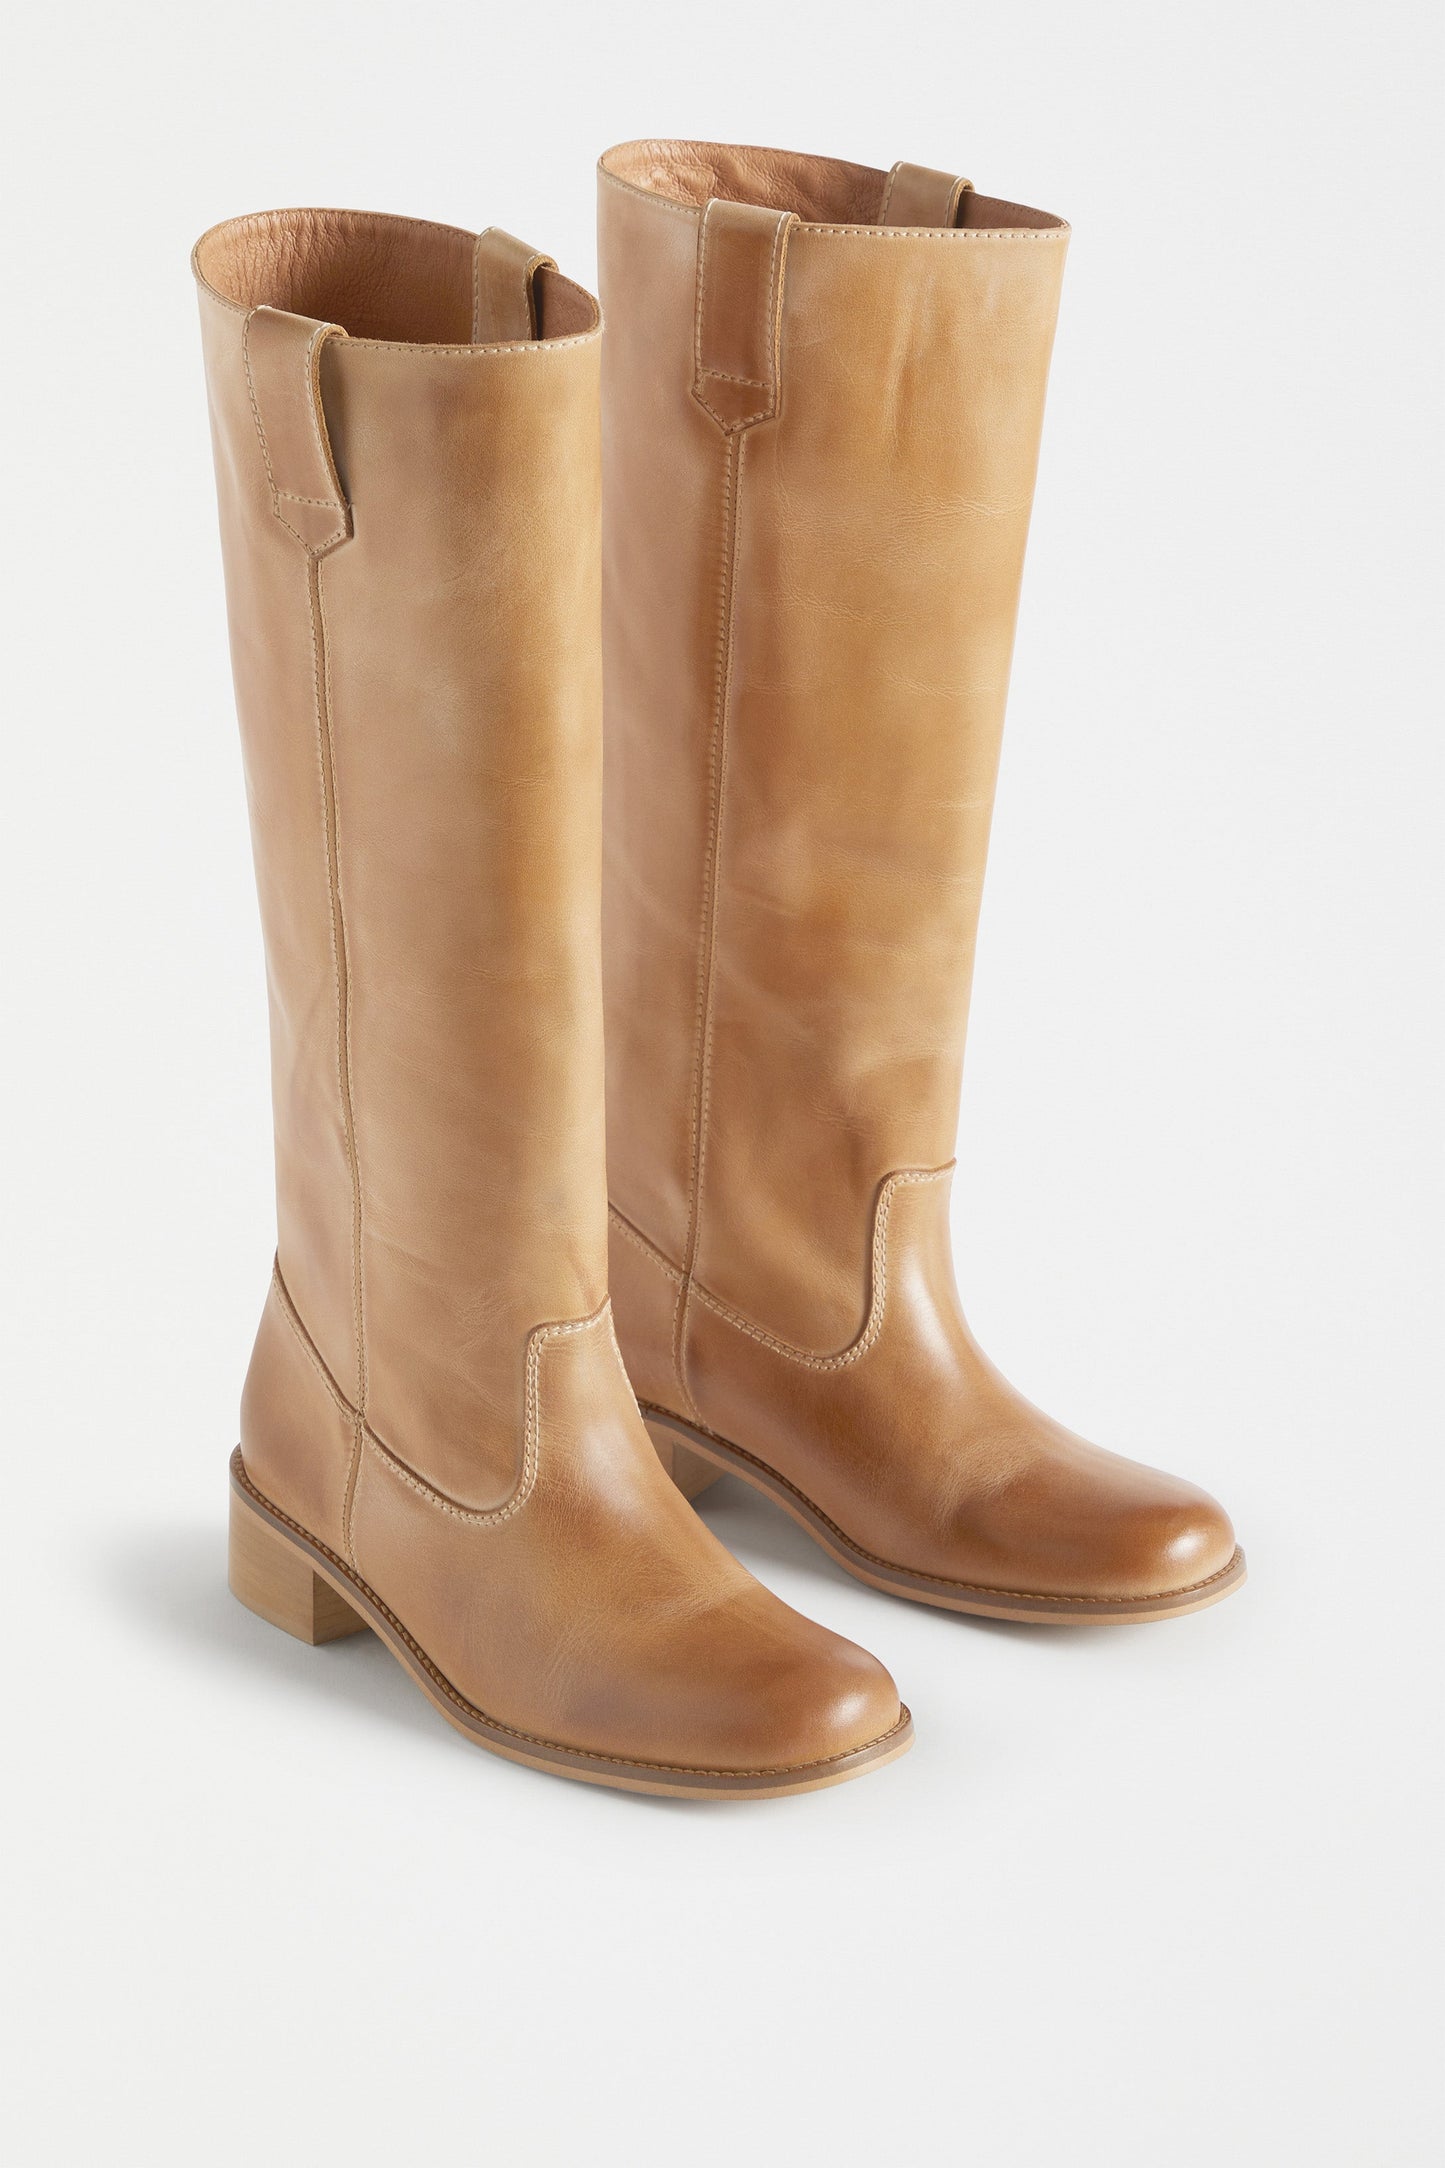 Anna Escovado Natural Worn Look Knee High Leather Boots Angled Front | TAN